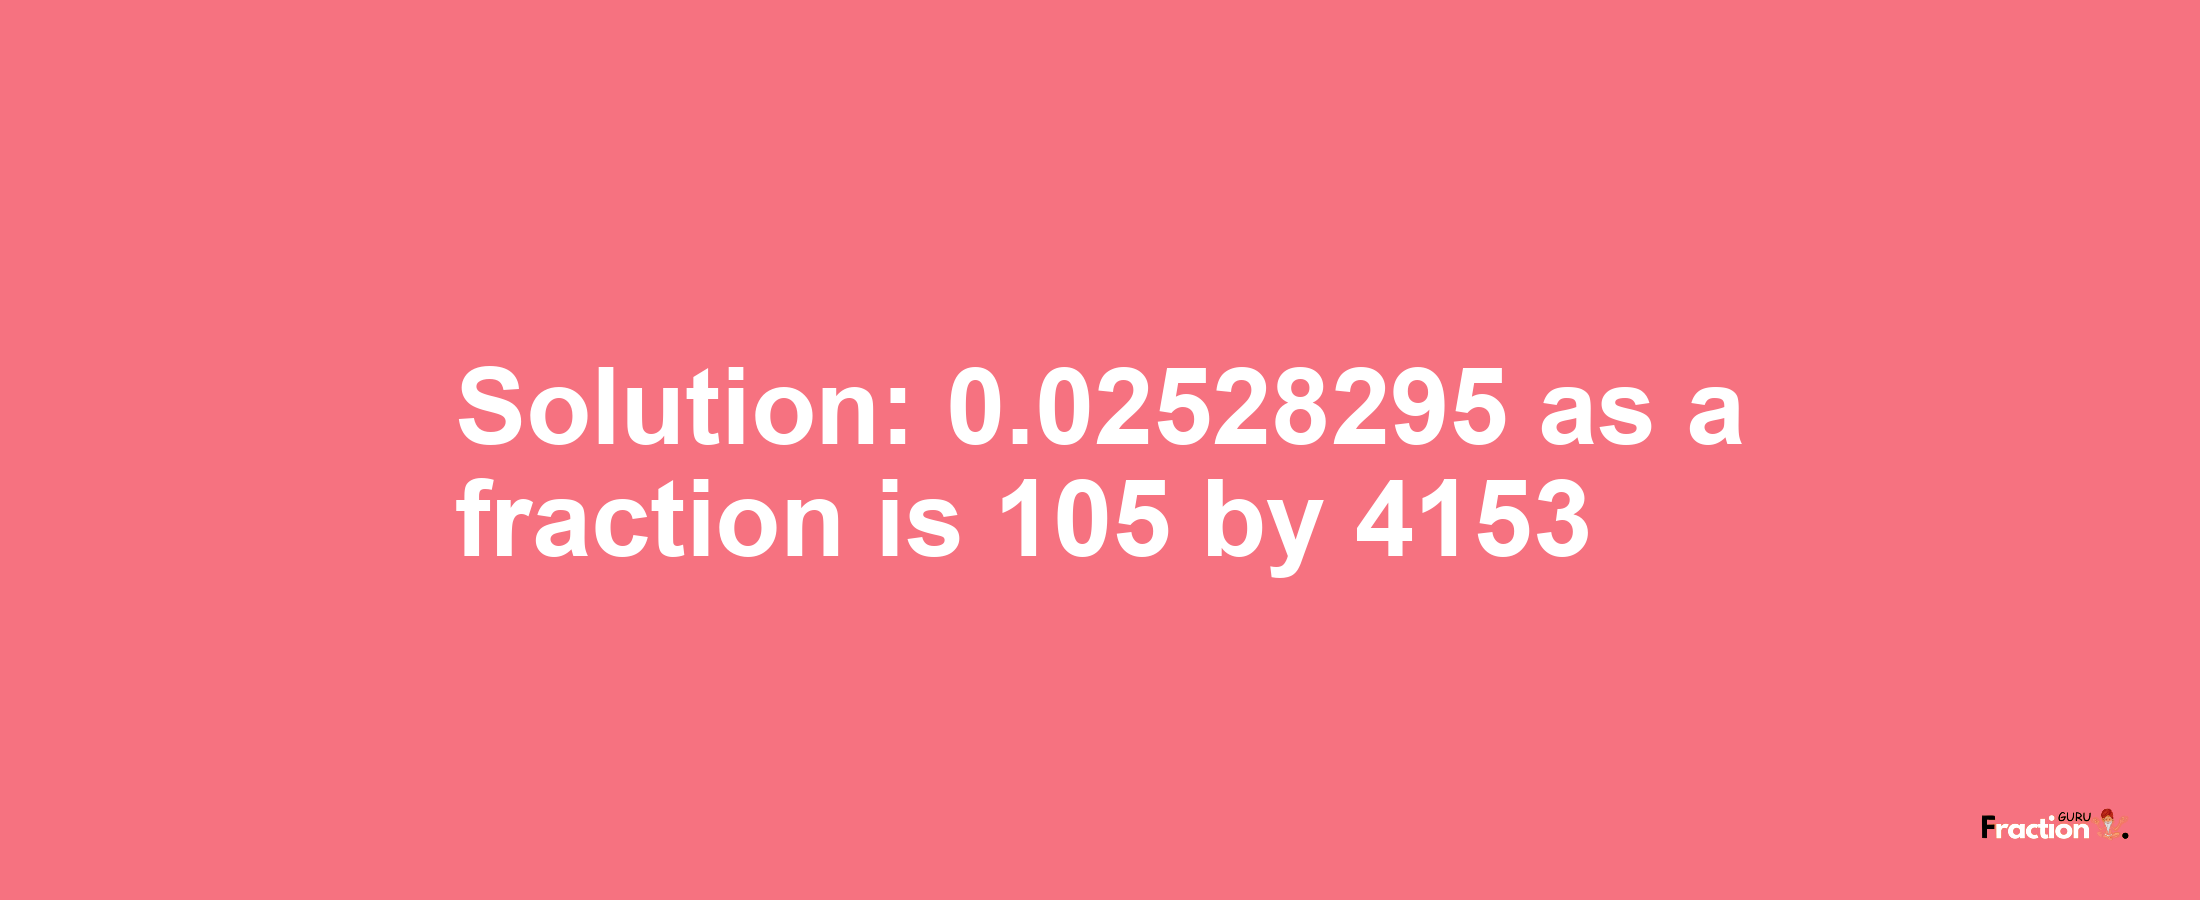 Solution:0.02528295 as a fraction is 105/4153